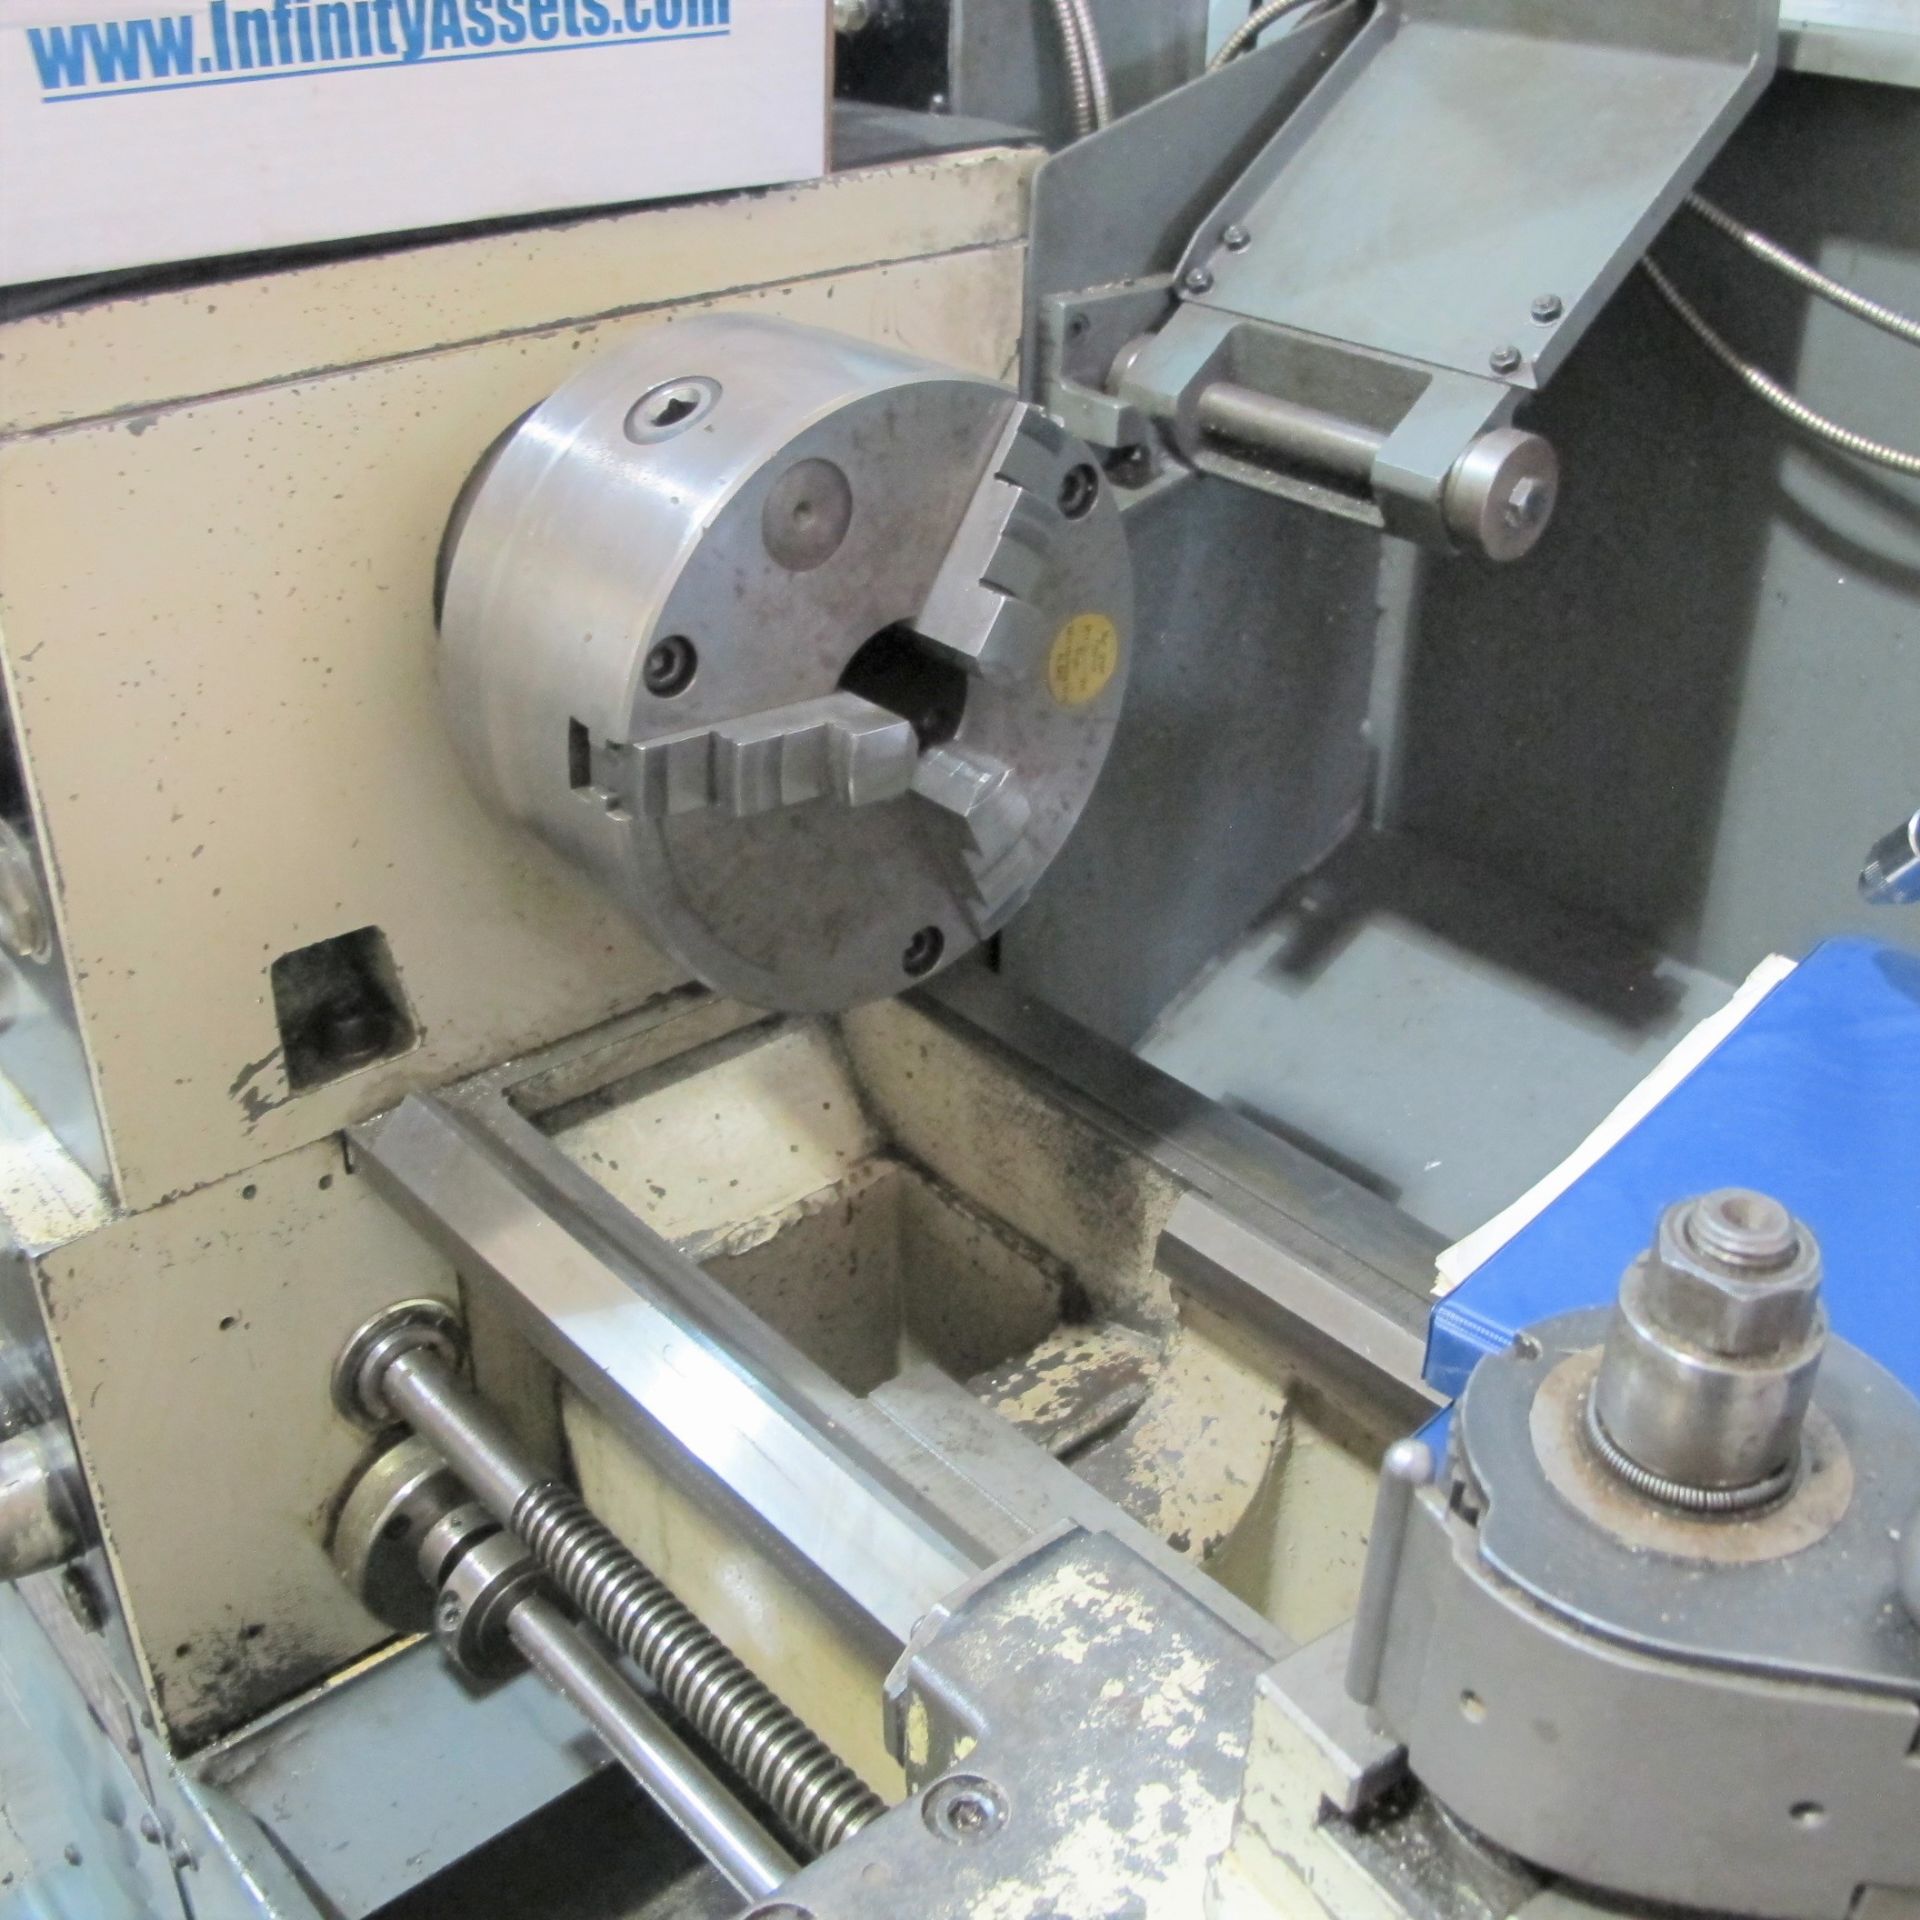 CLAUSING-METOSA C1430S LATHE, 8" 3-JAW CHUCK, ACURITE 2-AXIS DRO, 14” X 30”, SPEEDS TO 2,000 RPM, - Image 4 of 7